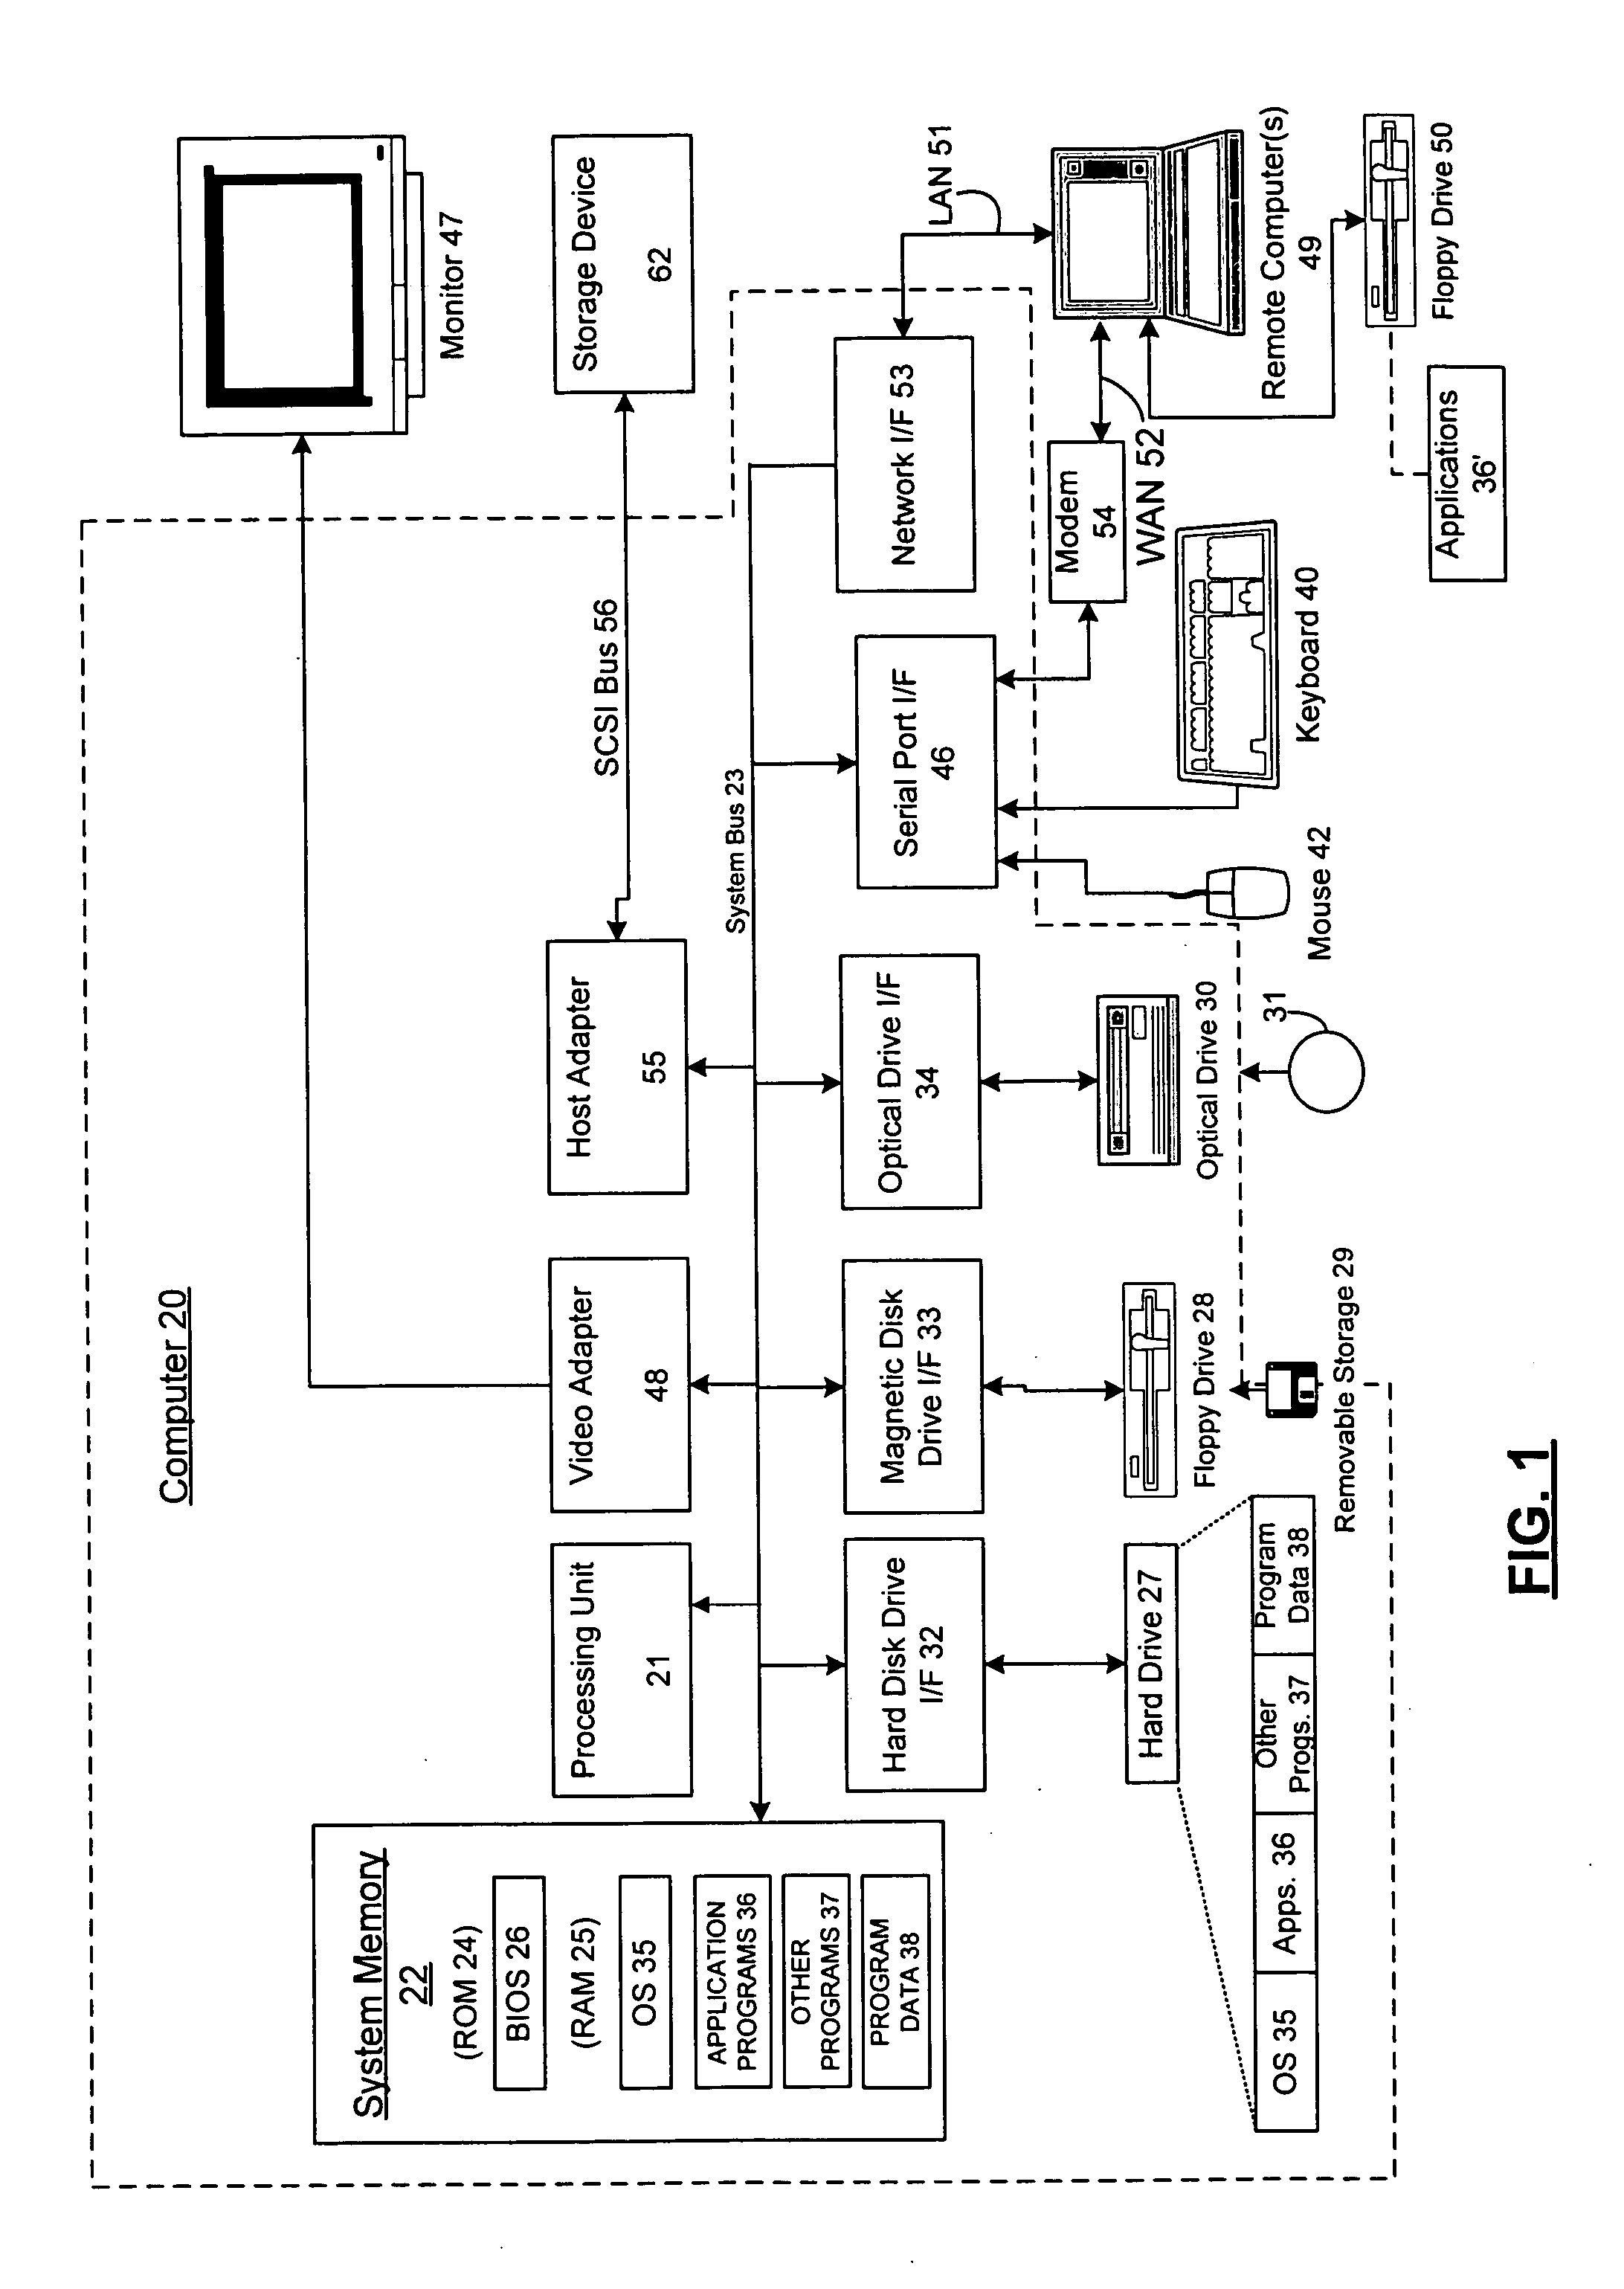 Systems and methods for all-frequency relighting using spherical harmonics and point light distributions